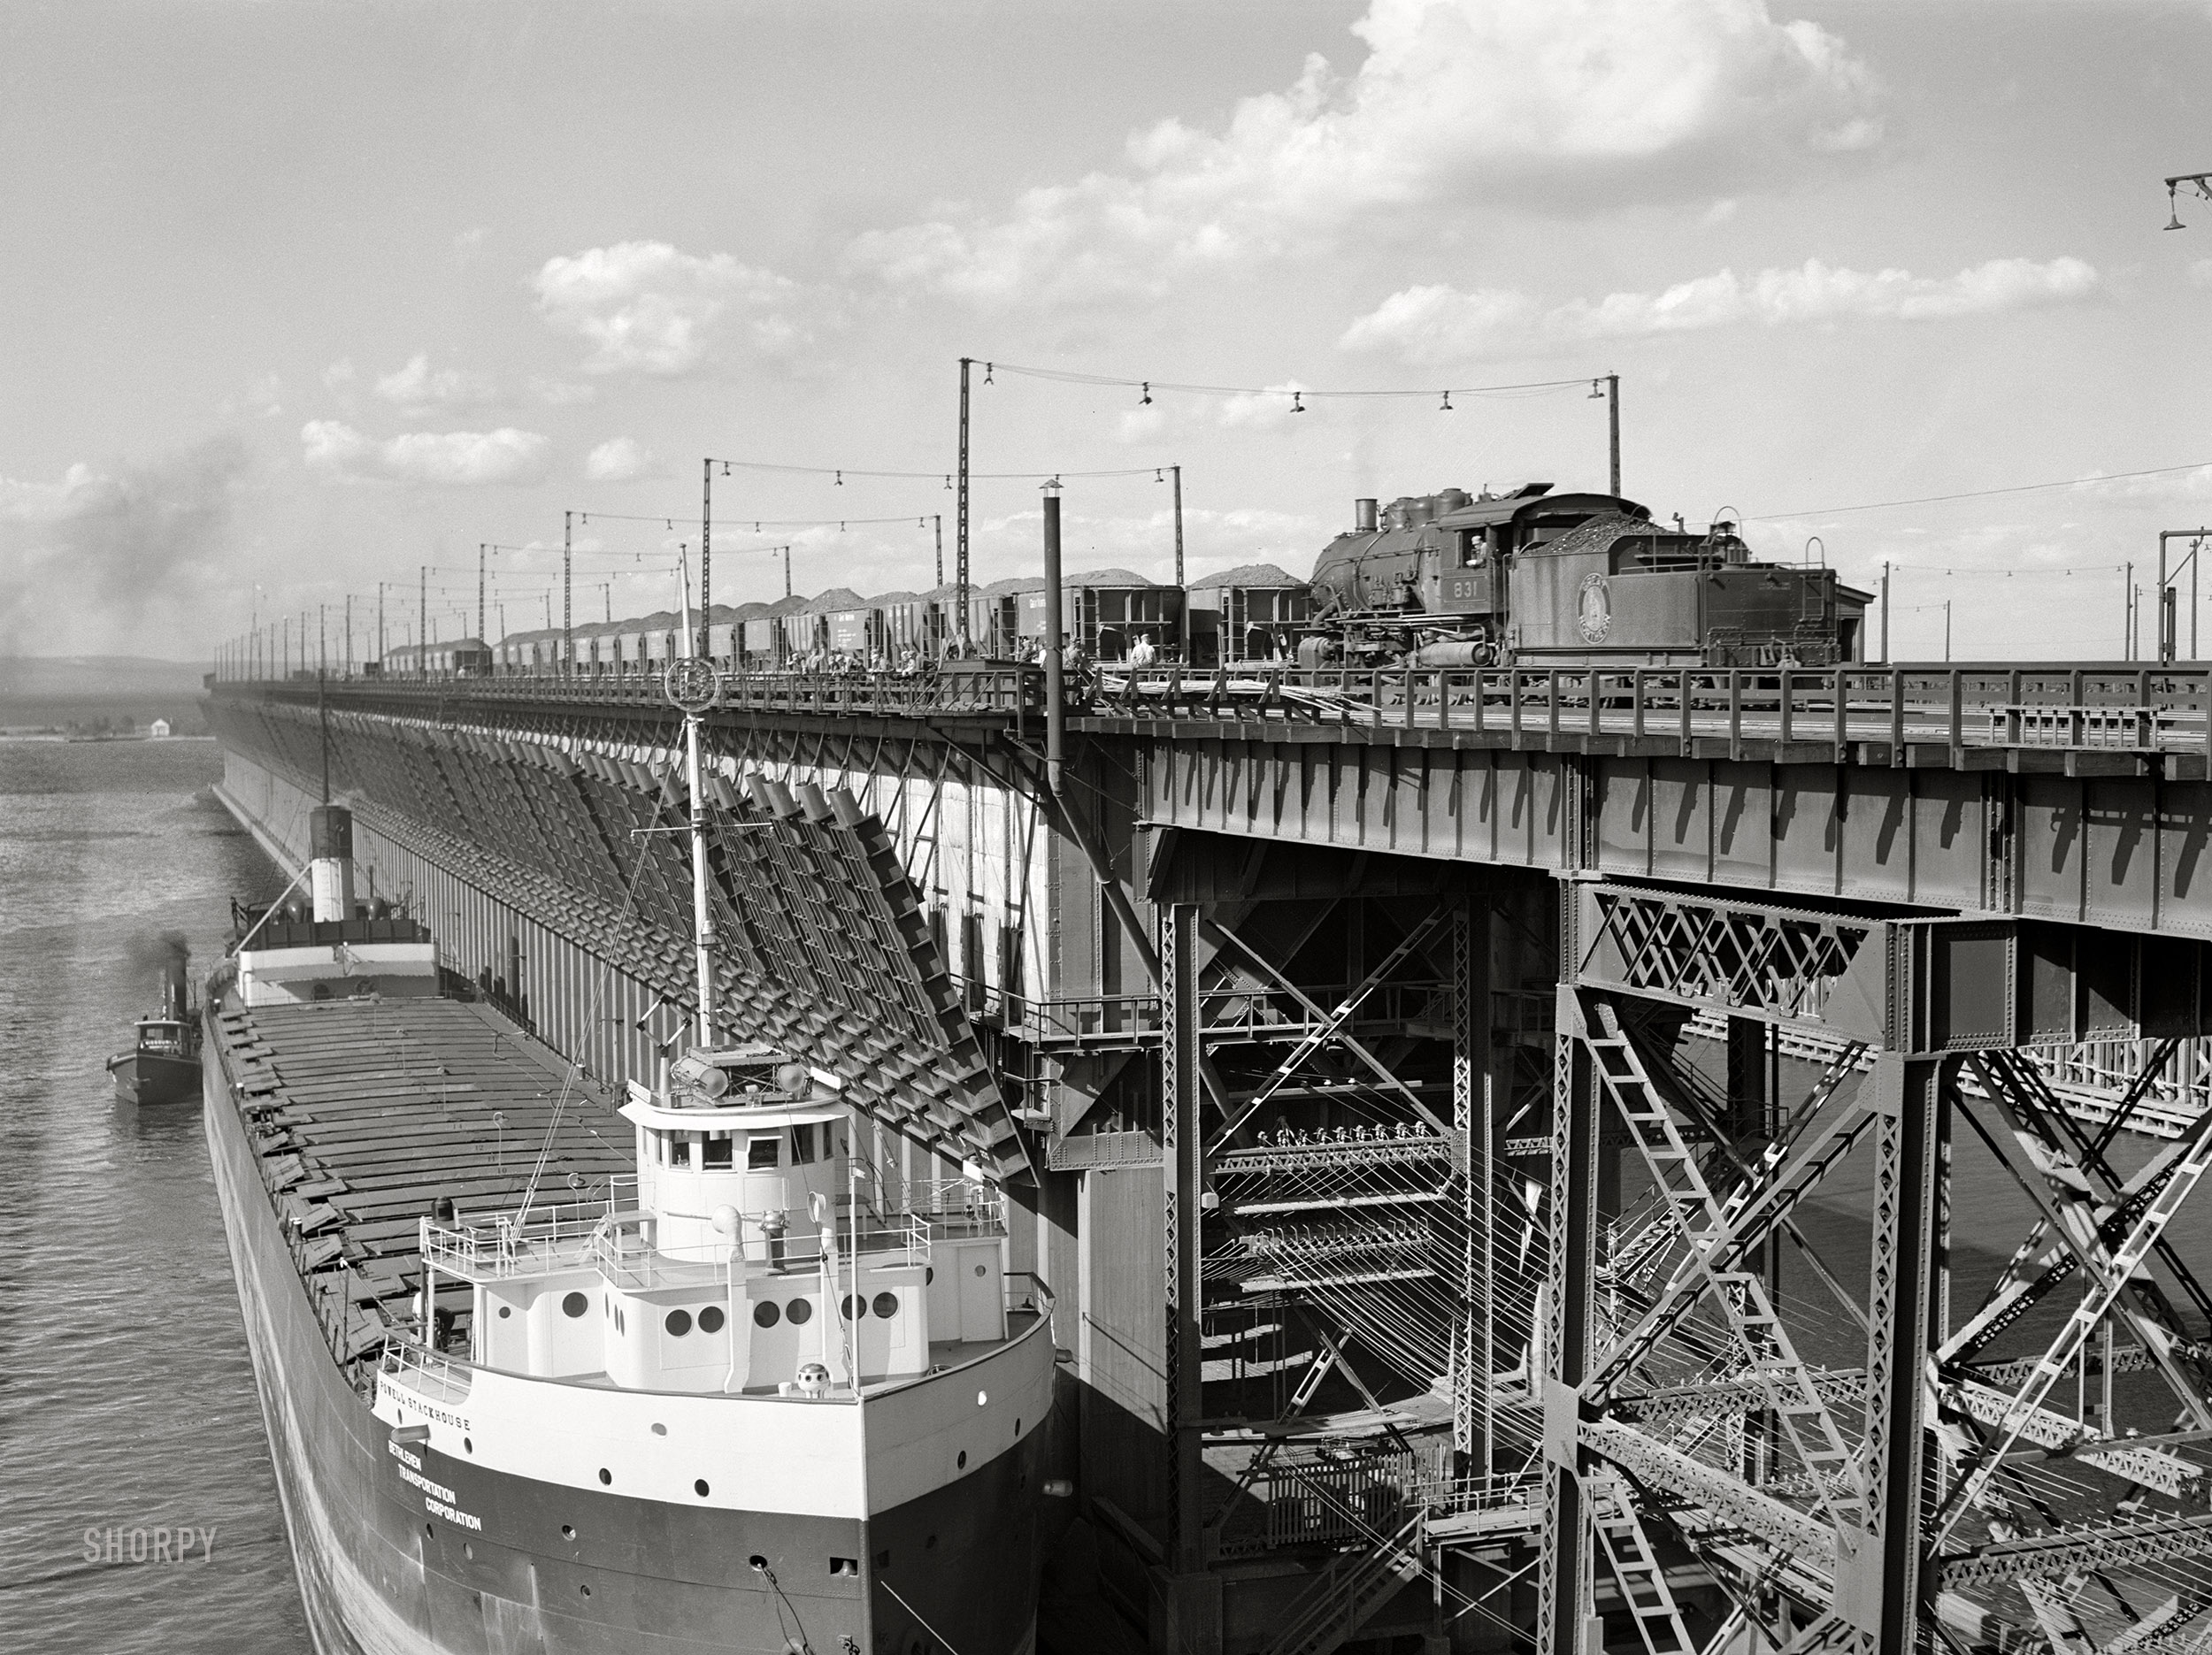 August 1941. "Iron ore docks at Allouez, Wisconsin." Medium format acetate negative by John Vachon for the Farm Security Administration. View full size.